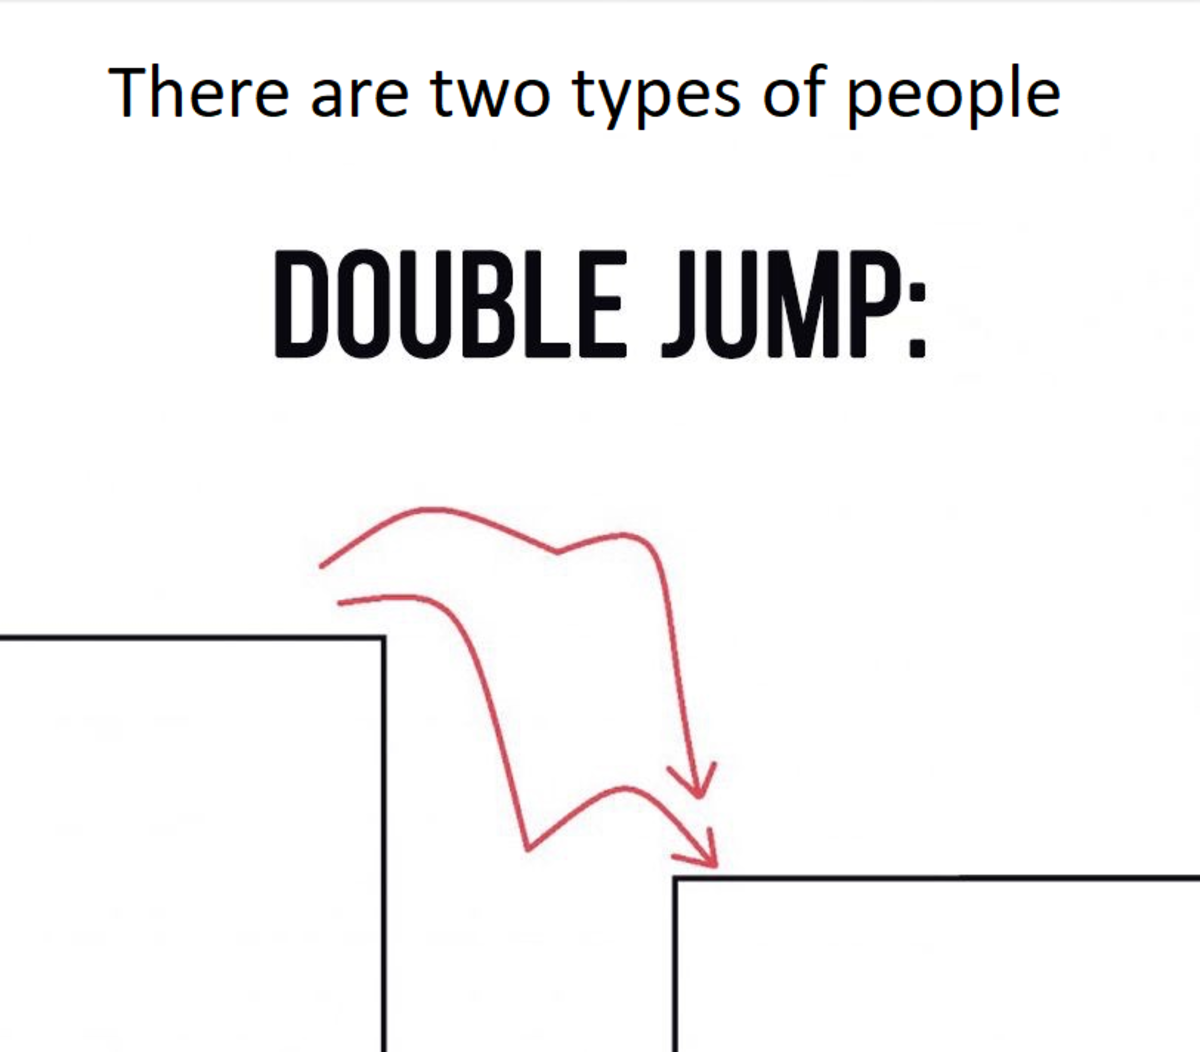 Two types of gamers. .. Actiully there's a third smarter person who realizes there's no need for a double jump here